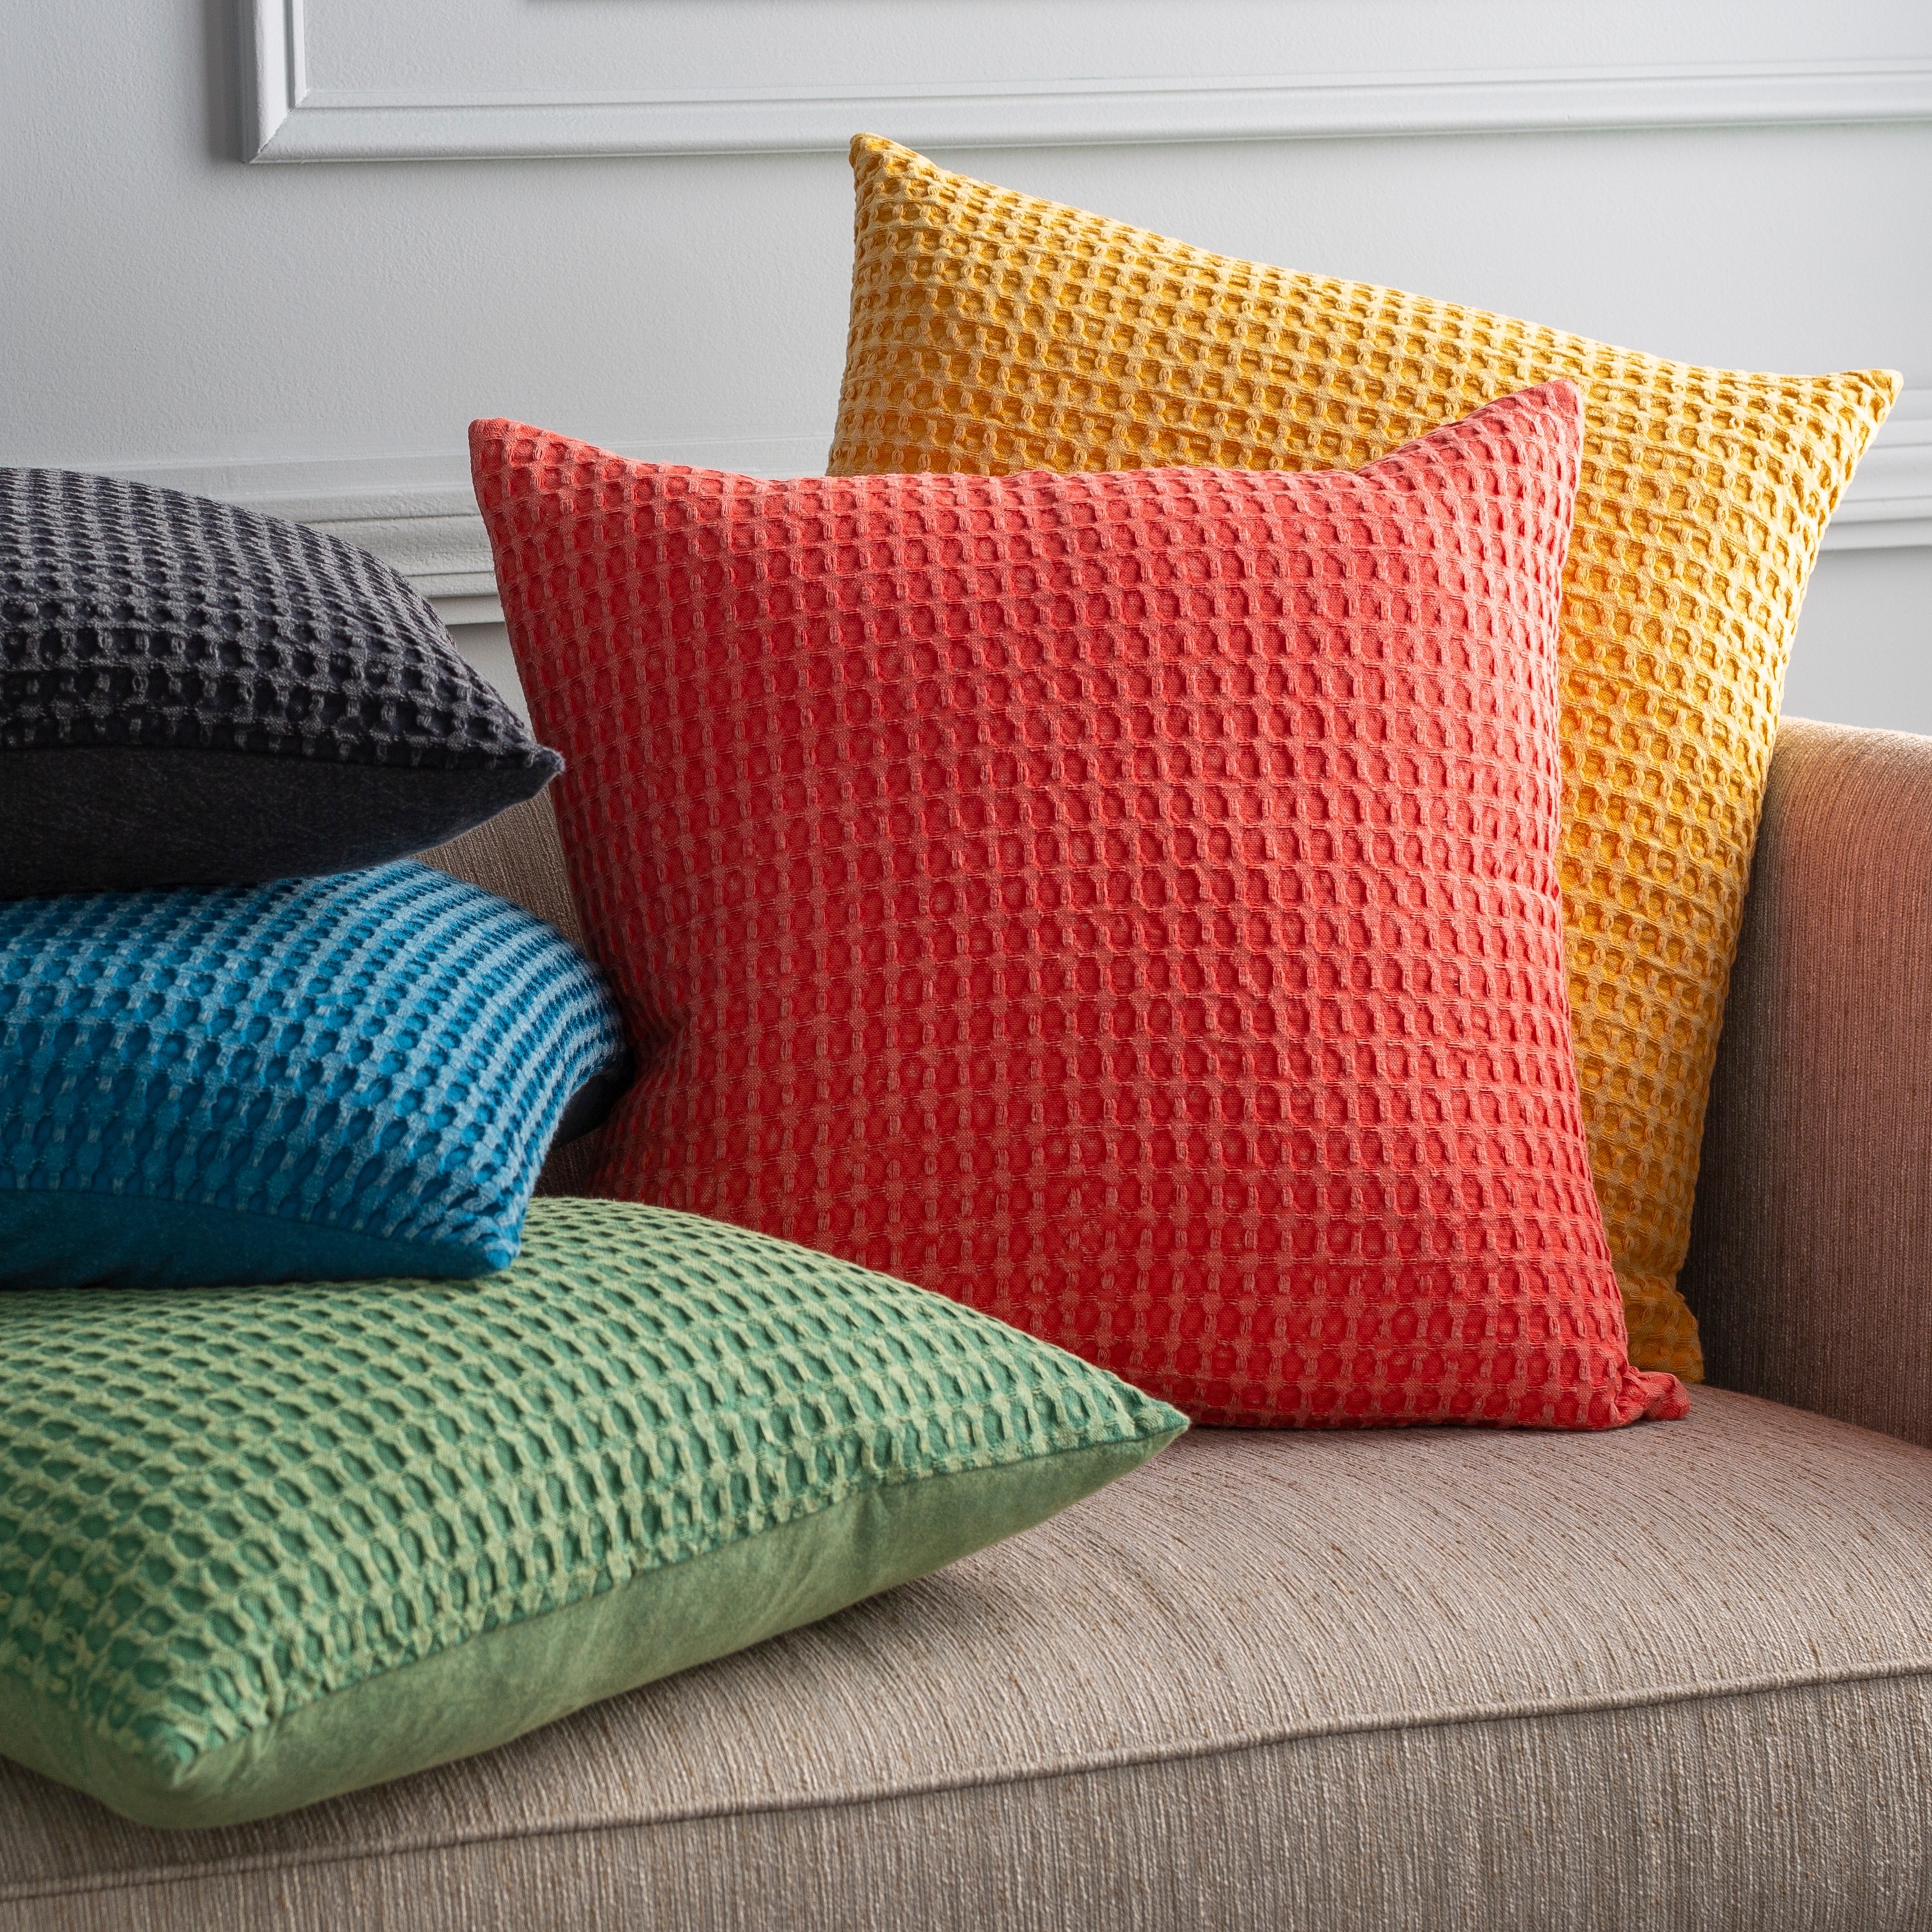 Traditional, Textured Throw Pillows - Bed Bath & Beyond